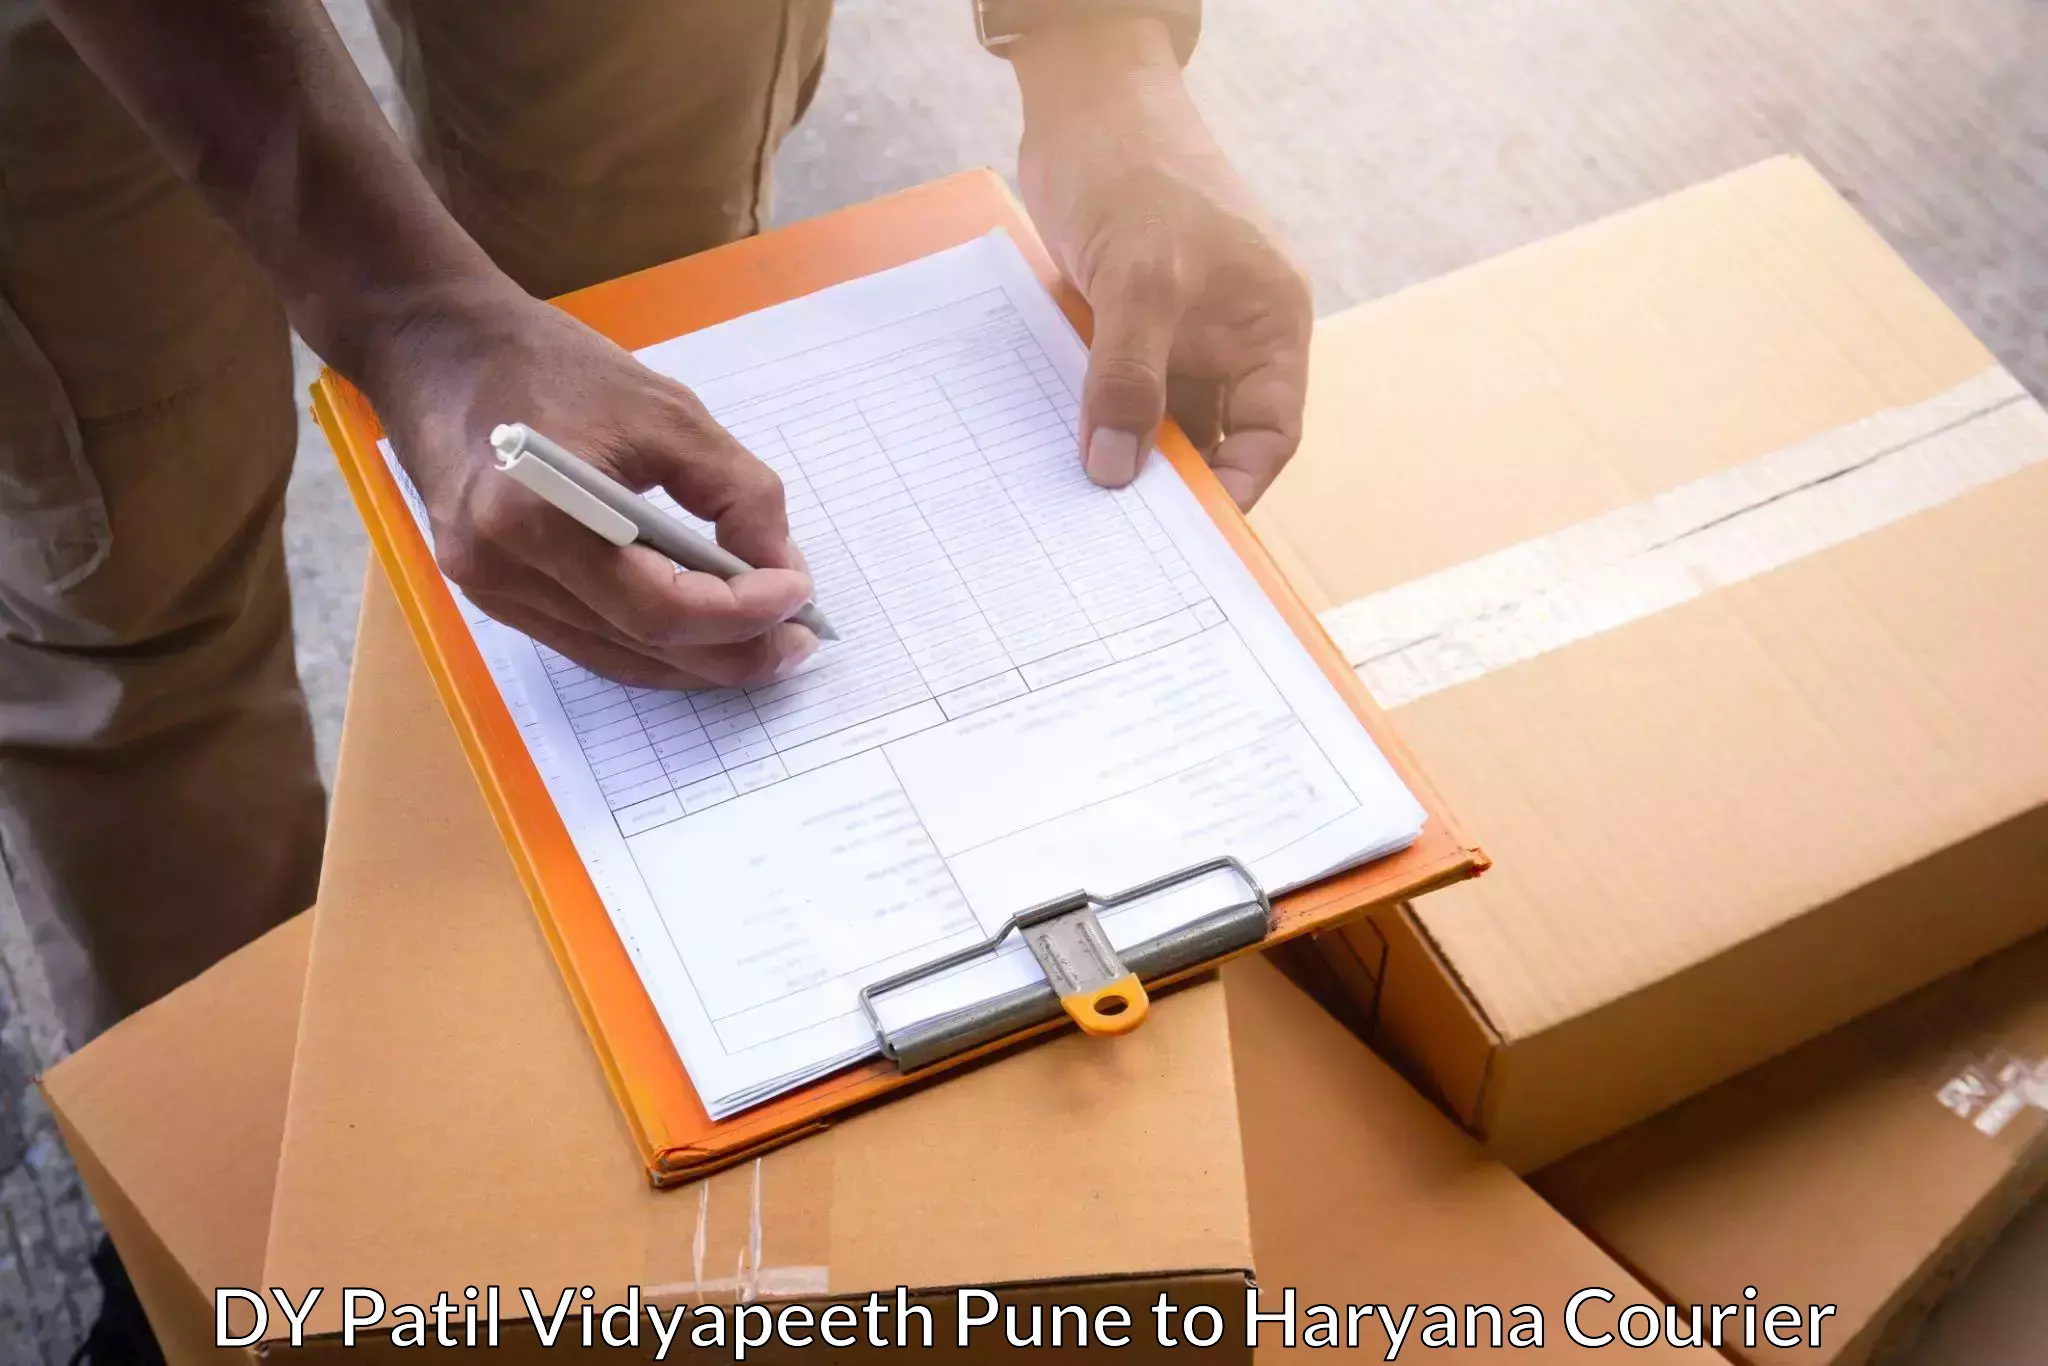 Secure package delivery in DY Patil Vidyapeeth Pune to Haryana